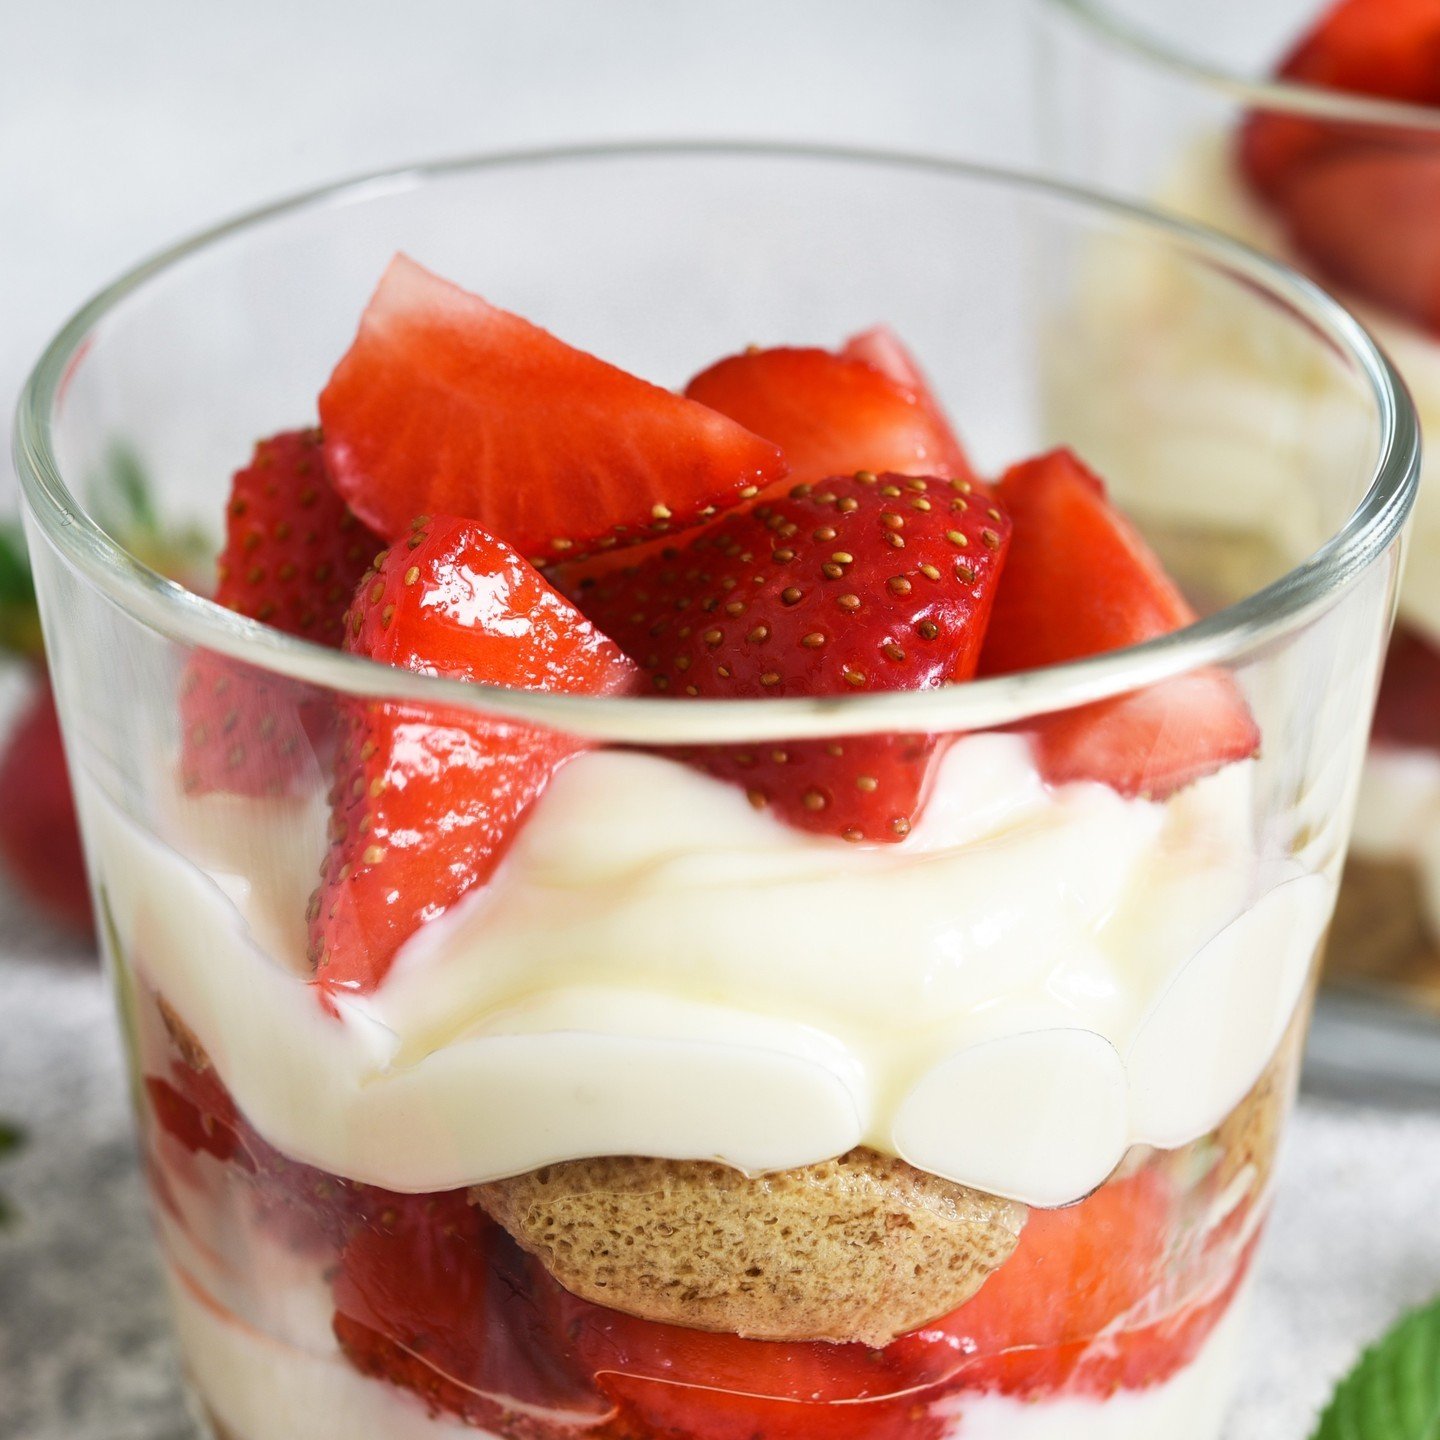 May is in full bloom, and so is berry season! 🍓🫐 Treat yourself to a slice of heaven with this Berry Tiramisu recipe from @egglandsbest &ndash; it's the perfect way to welcome the flavors of the season.

Ingredients:
1 package GF lady fingers
1/2 c